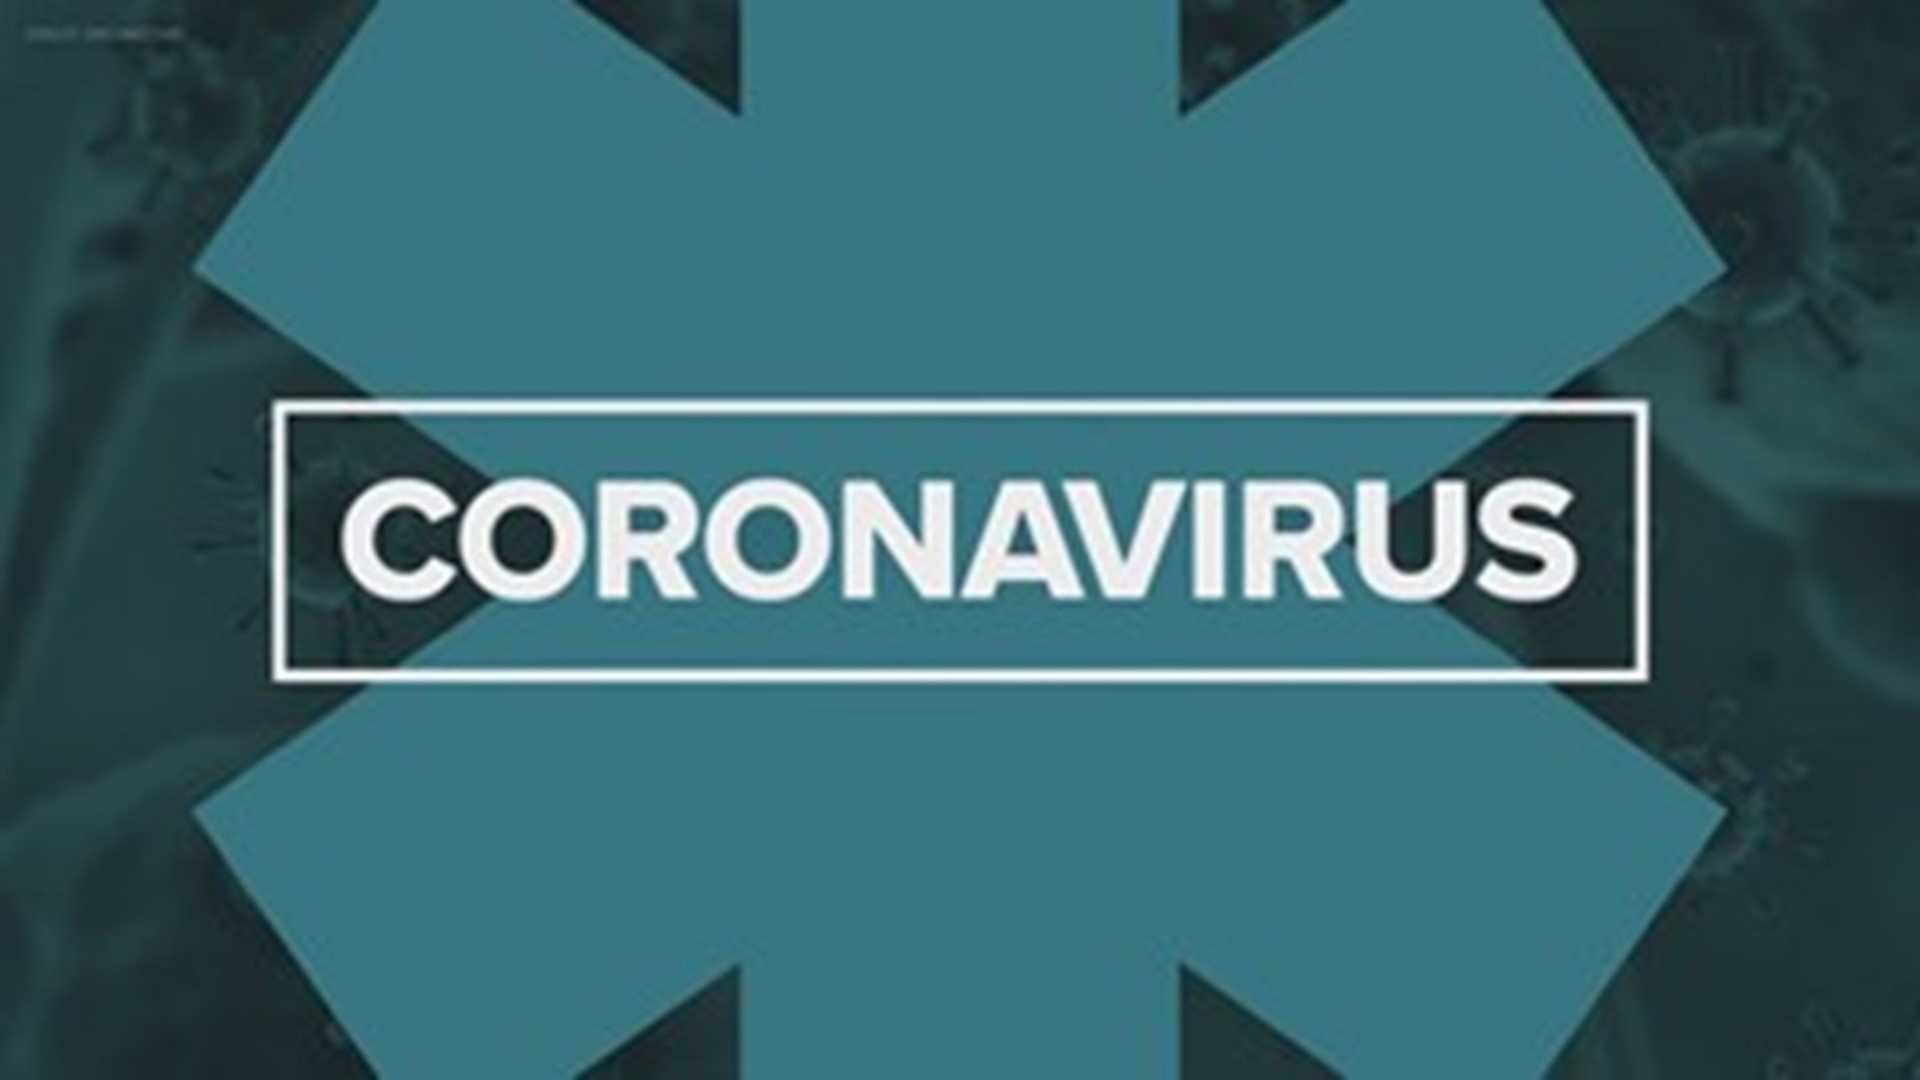 Indiana coronavirus updates: Record number of hospitalizations due to COVID, some schools move to virtual learning, contact tracers focus on school cases